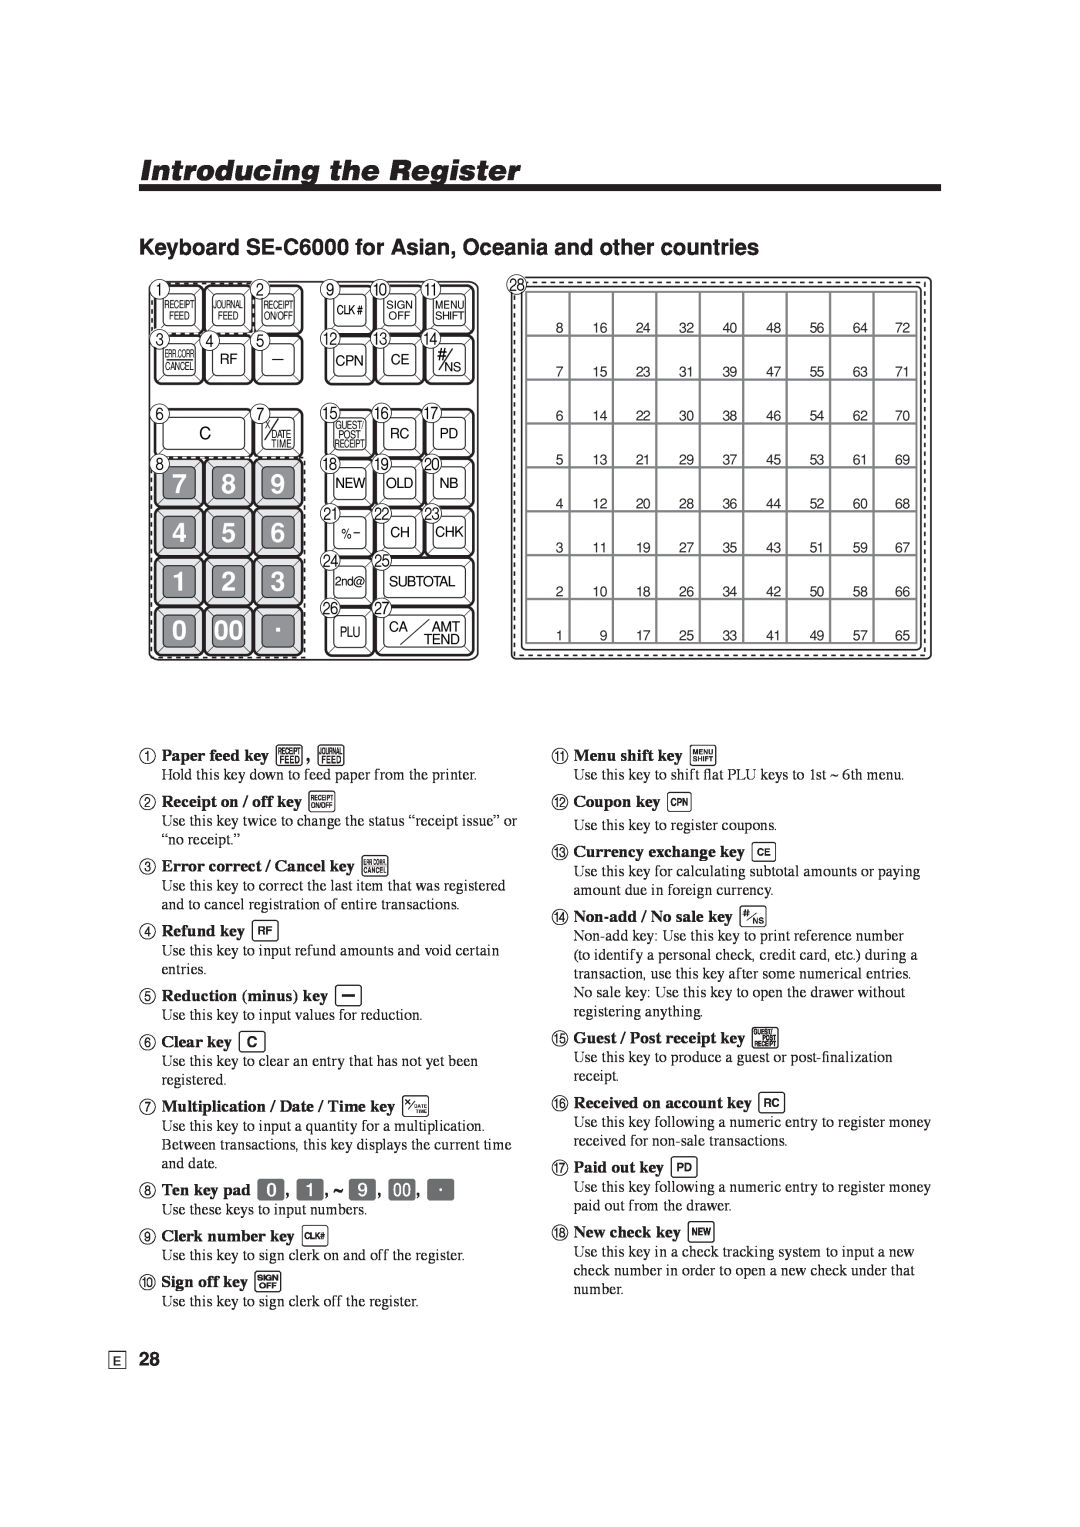 Casio SE-S6000 user manual Keyboard SE-C6000 for Asian, Oceania and other countries, Introducing the Register 